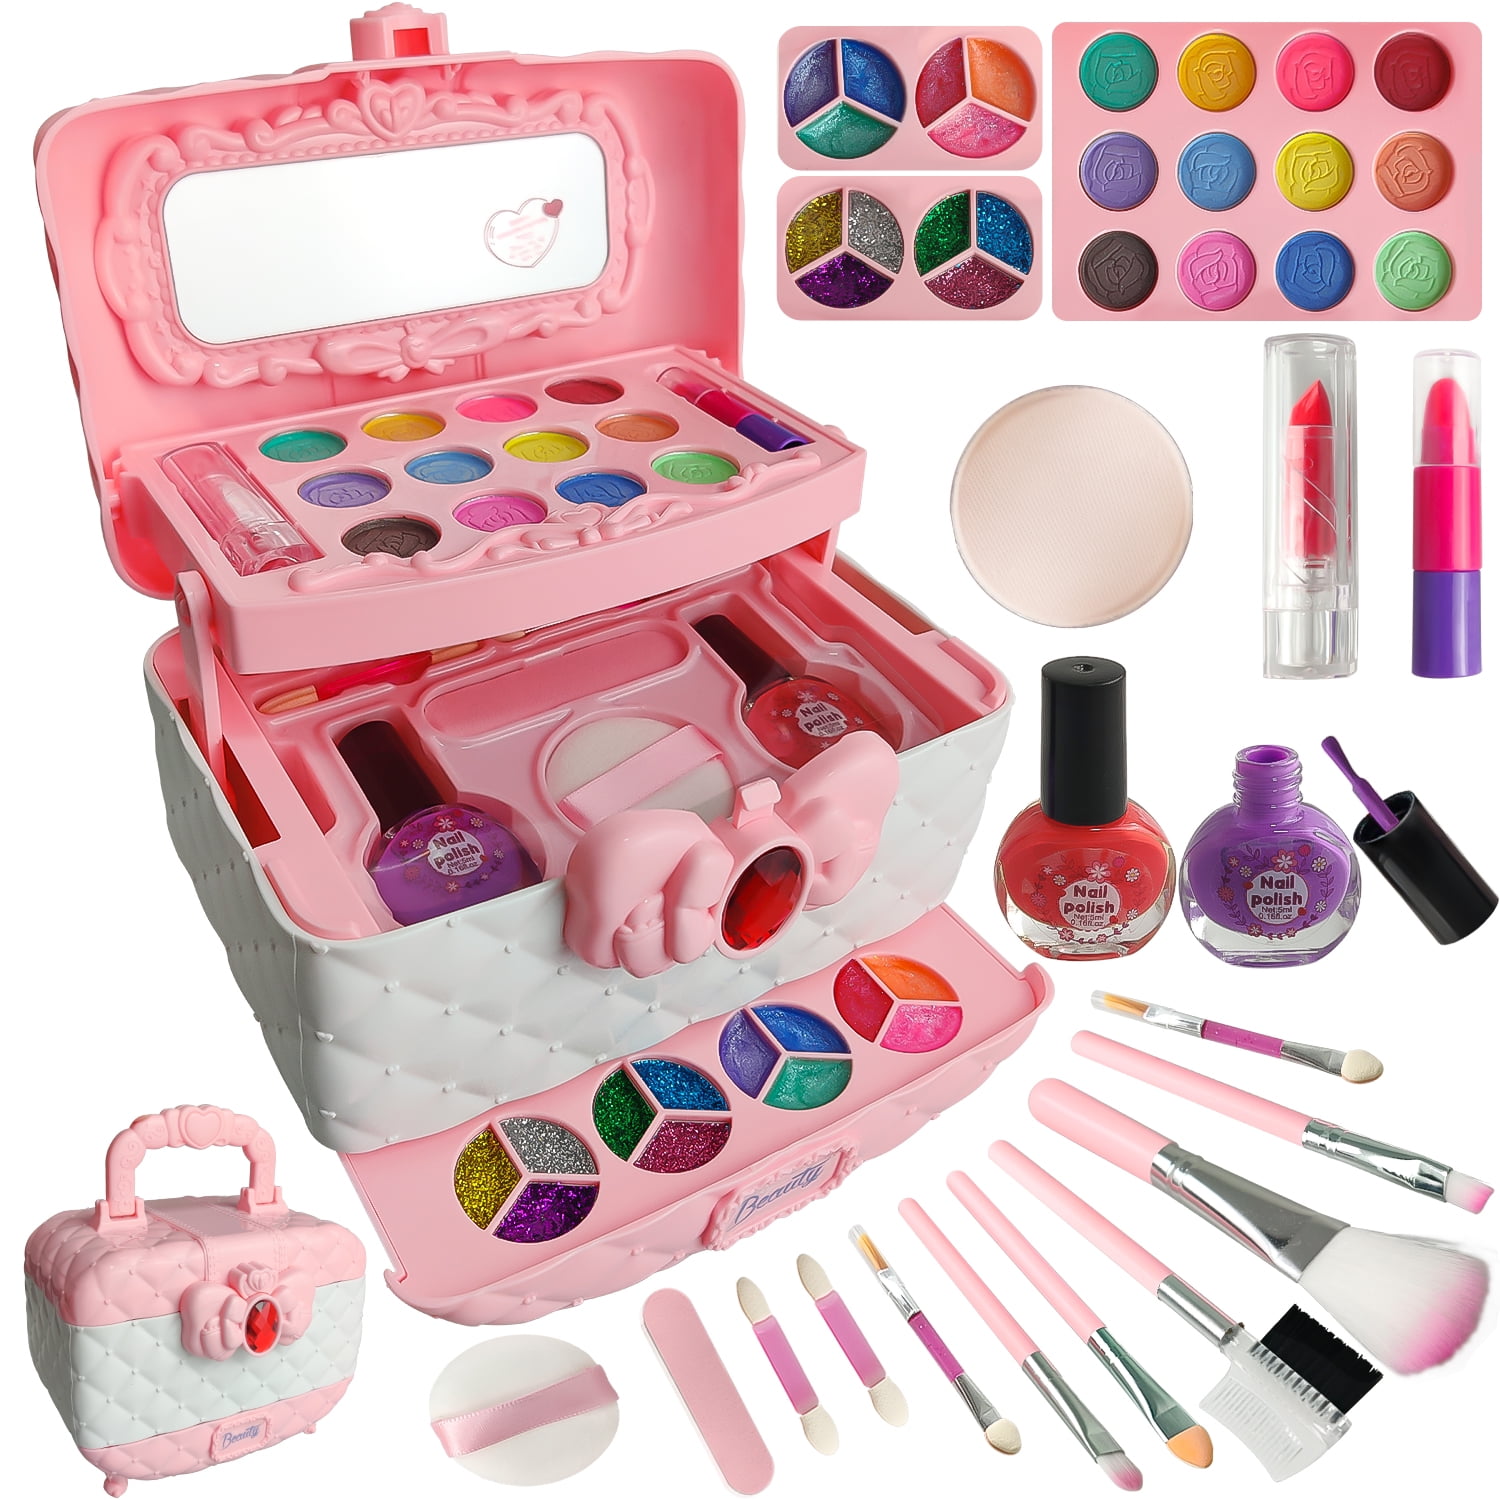 Toys For Girls Beauty Set Make Up Kids 3 4 5 6 7 8 Years Age Old Birthday  Gifts Makeup Tools - Beauty & Fashion Toys - AliExpress